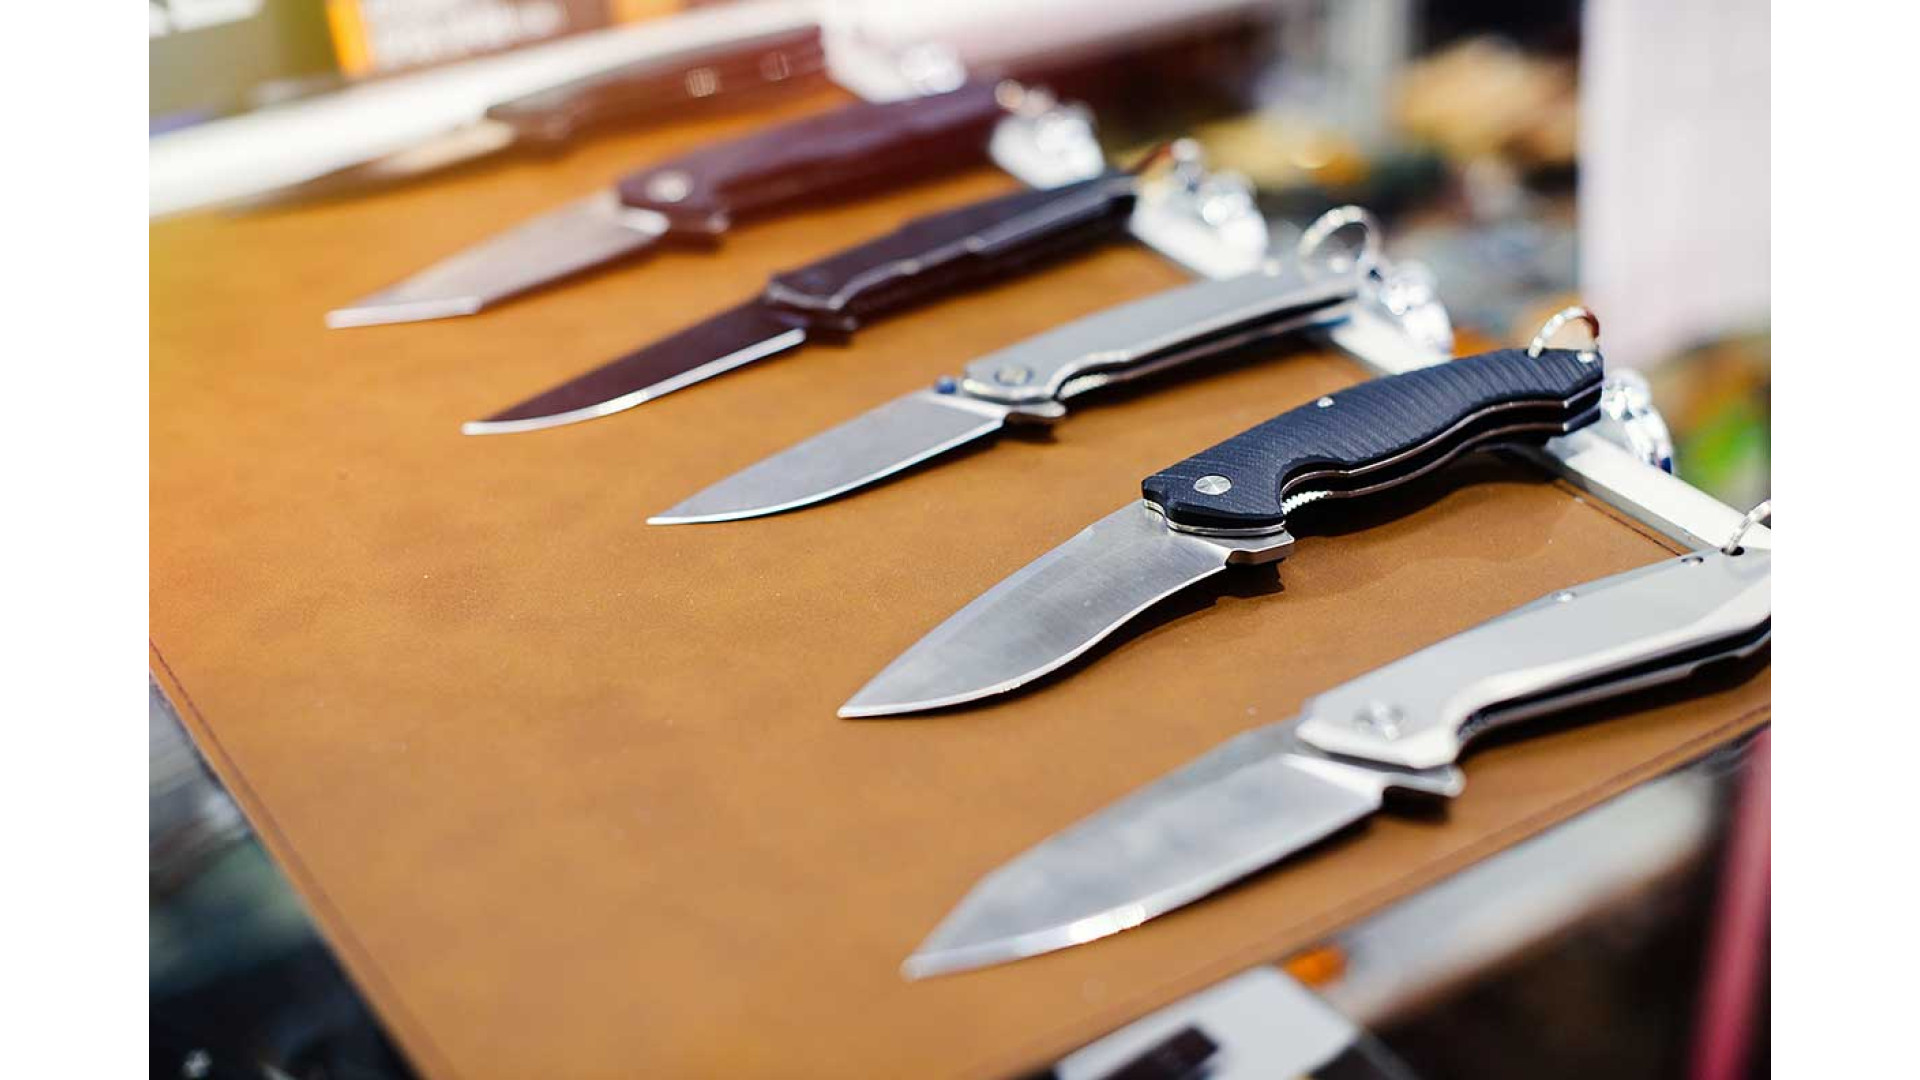 https://www.ckbproducts.com/image/cache/catalog/5-types-of-edc-knives-which-is-best-for-you-1920x1080.jpg